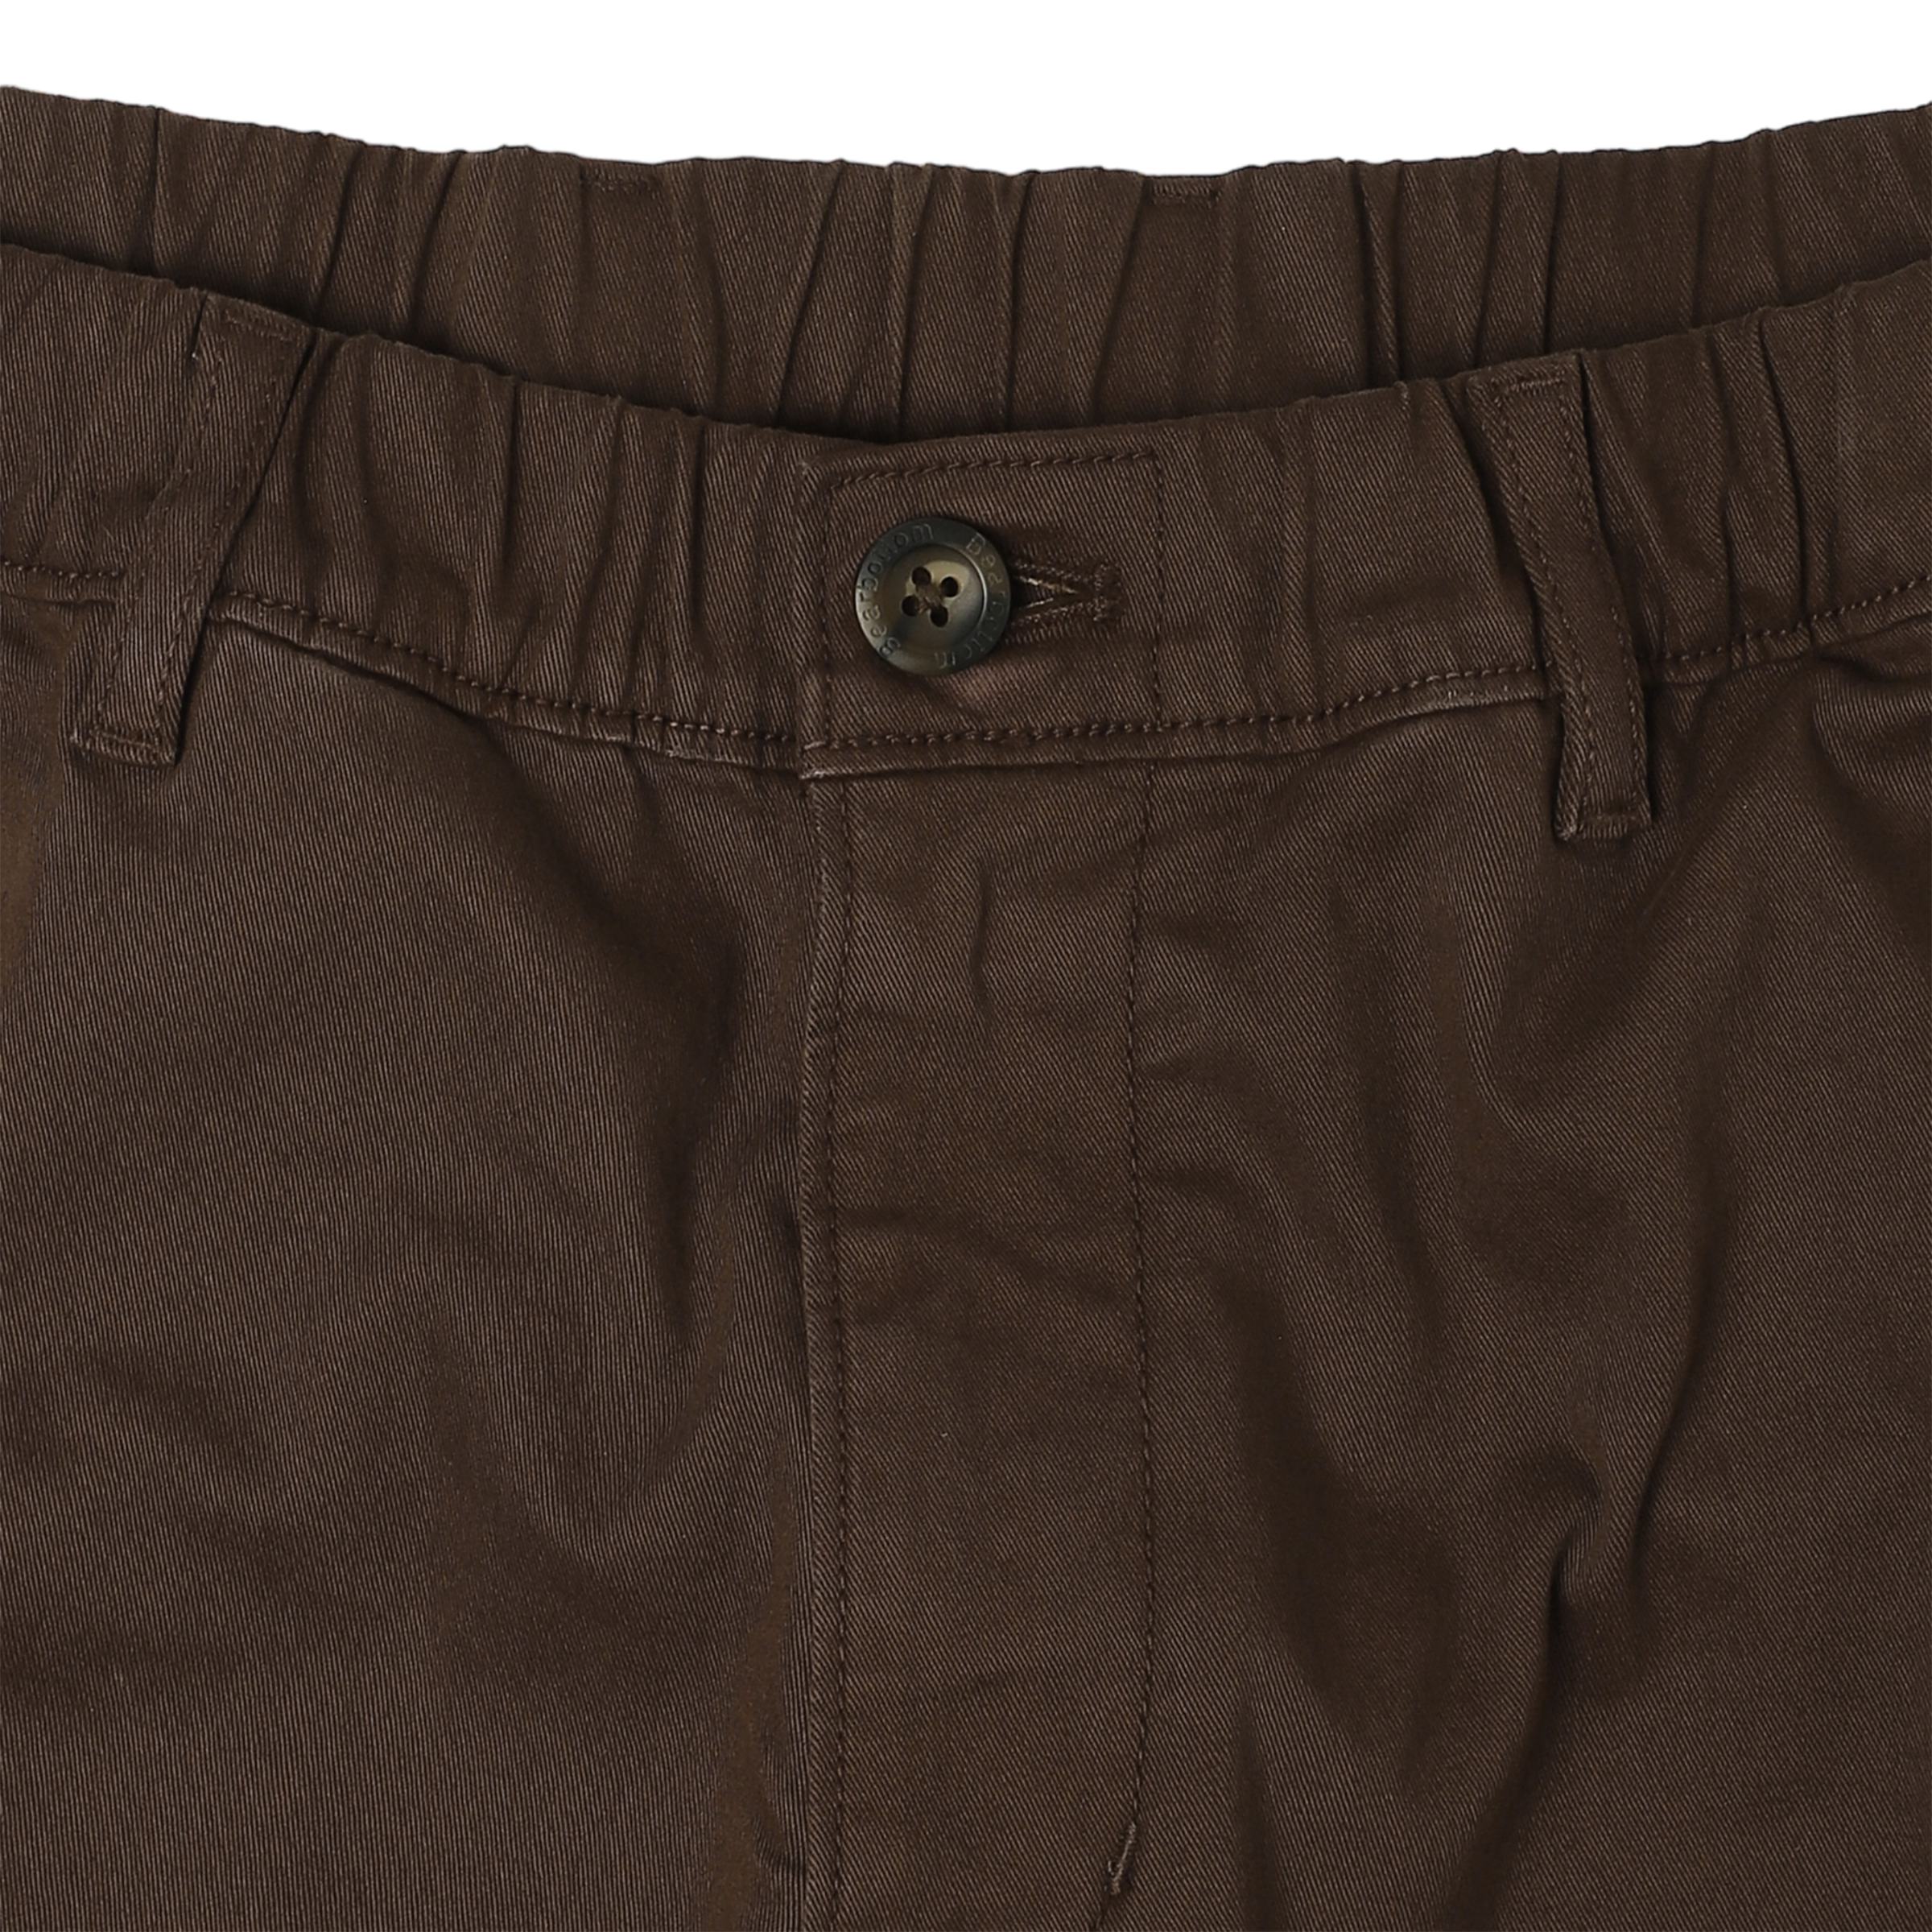 Relaxed Stretch Chino Pant Cocoa close up elastic waistband